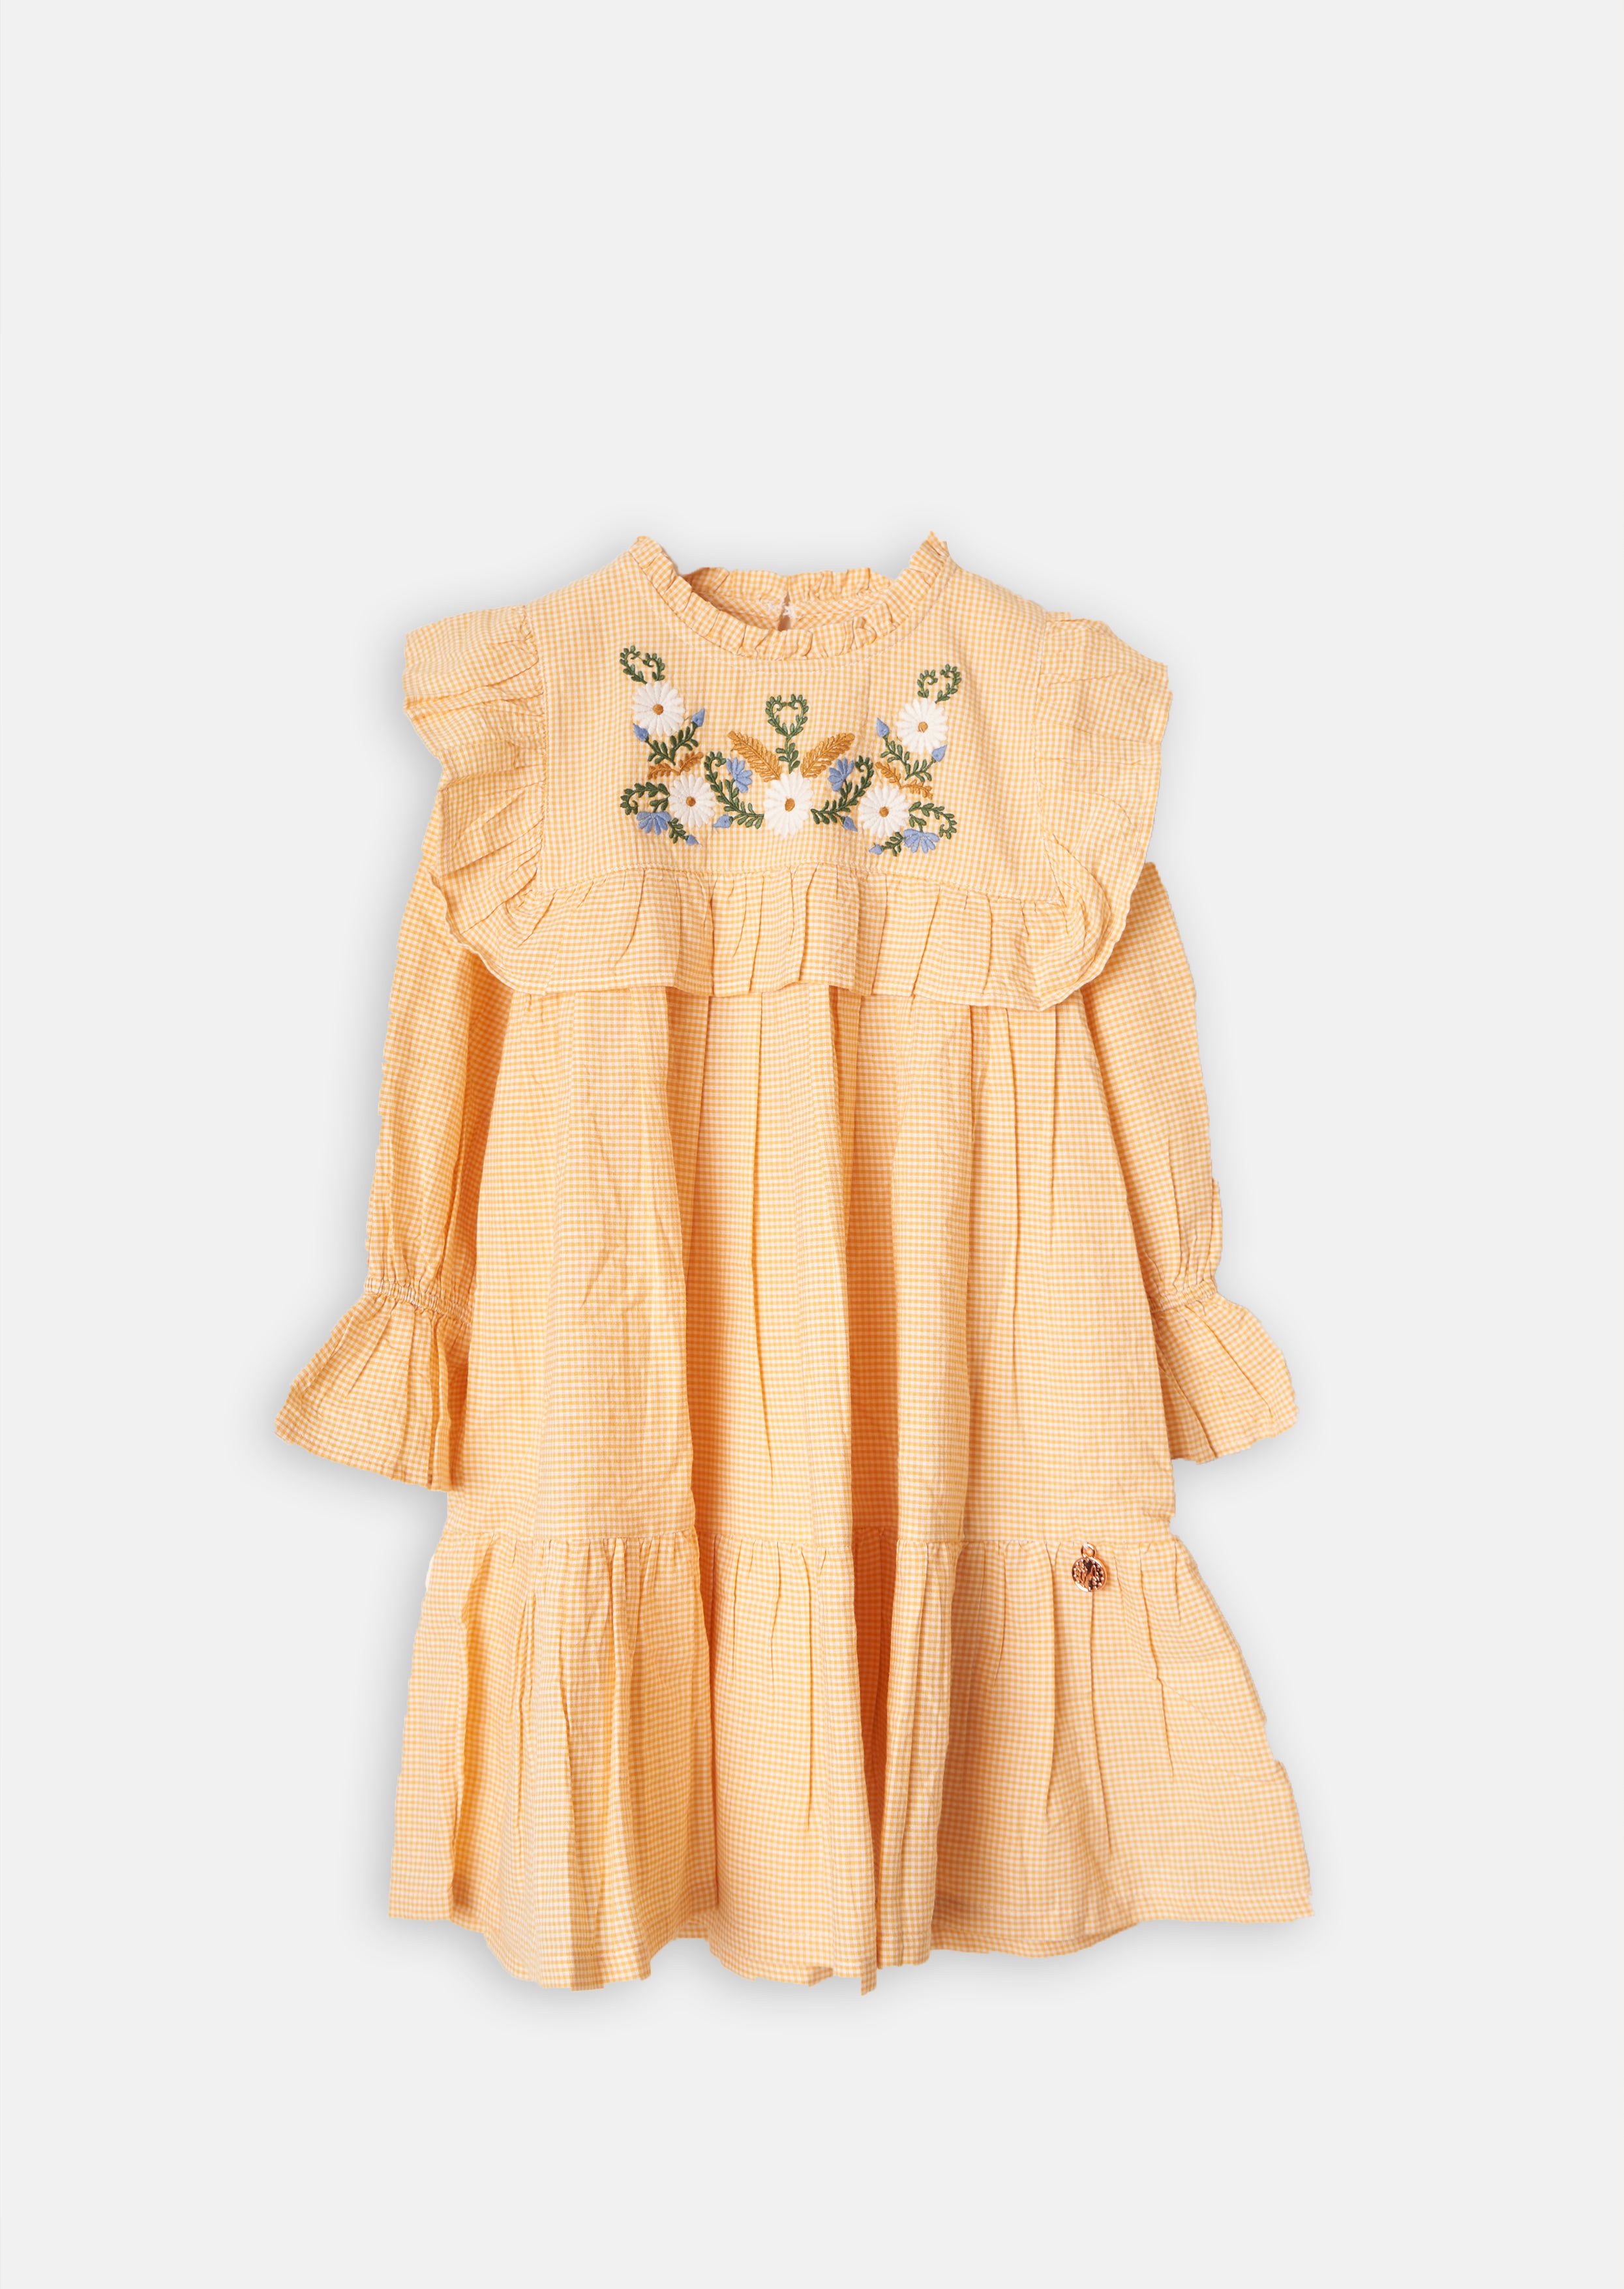 Girls Cotton Yellow Floral Embroidered Dress